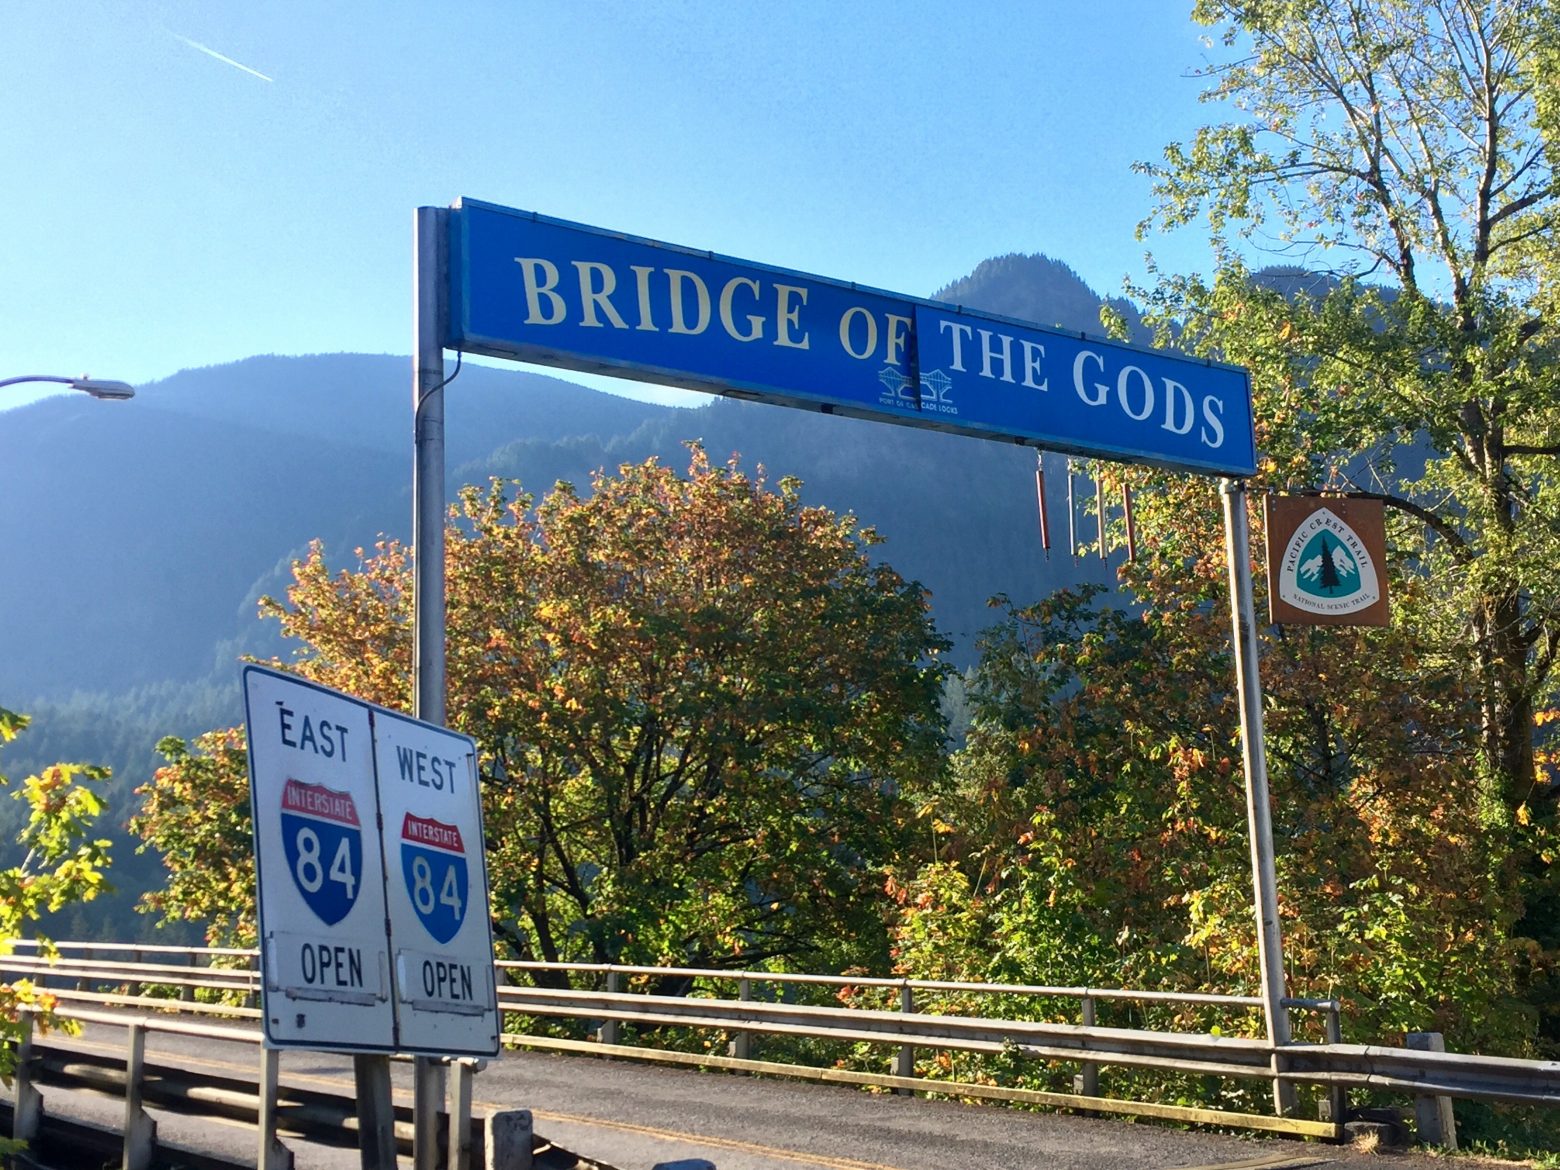 Looking back at the Bridge of the Gods